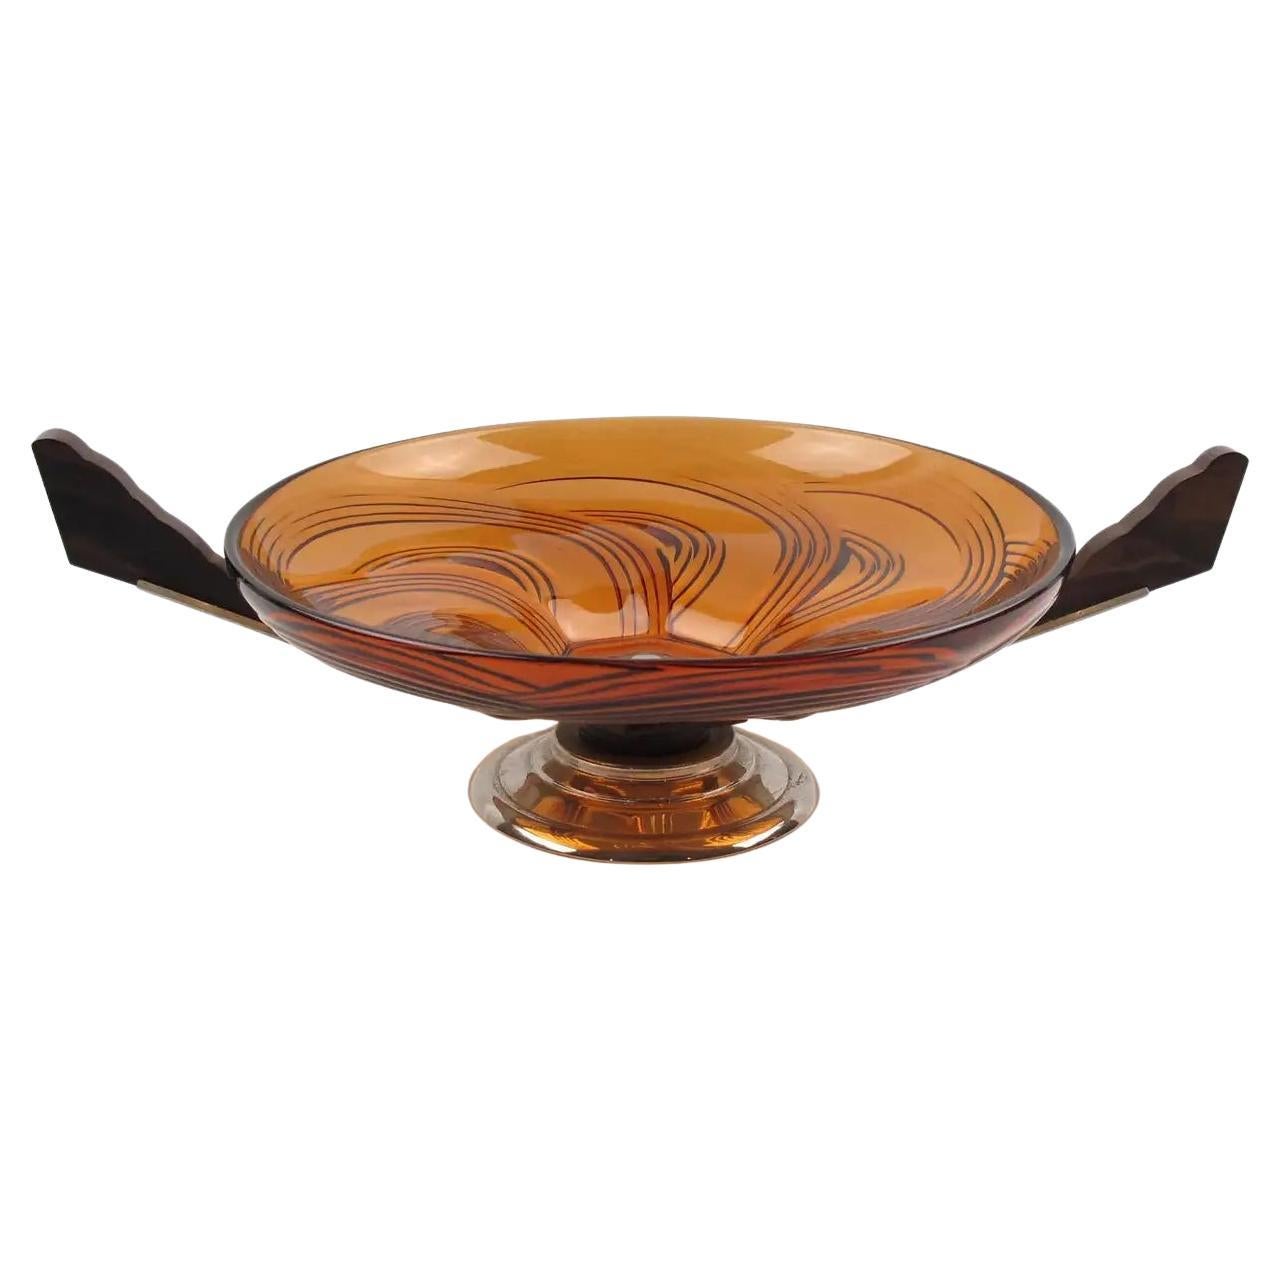 Art Deco Macassar Wood and Glass Centerpiece Bowl, France 1930s For Sale